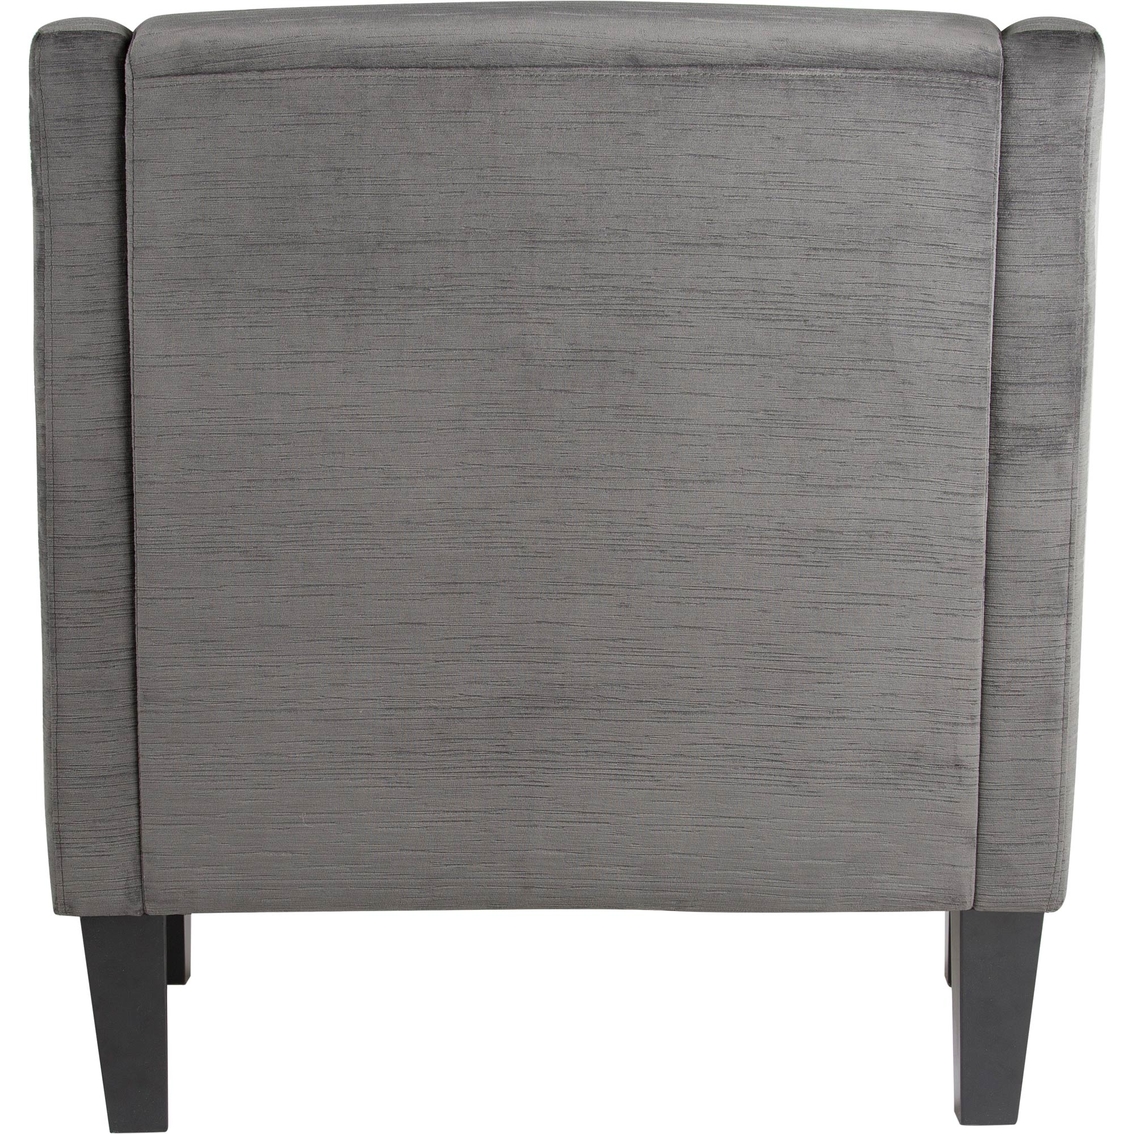 Studio Designs Home Grotto Modern Wingback Accent Chair - Image 2 of 4